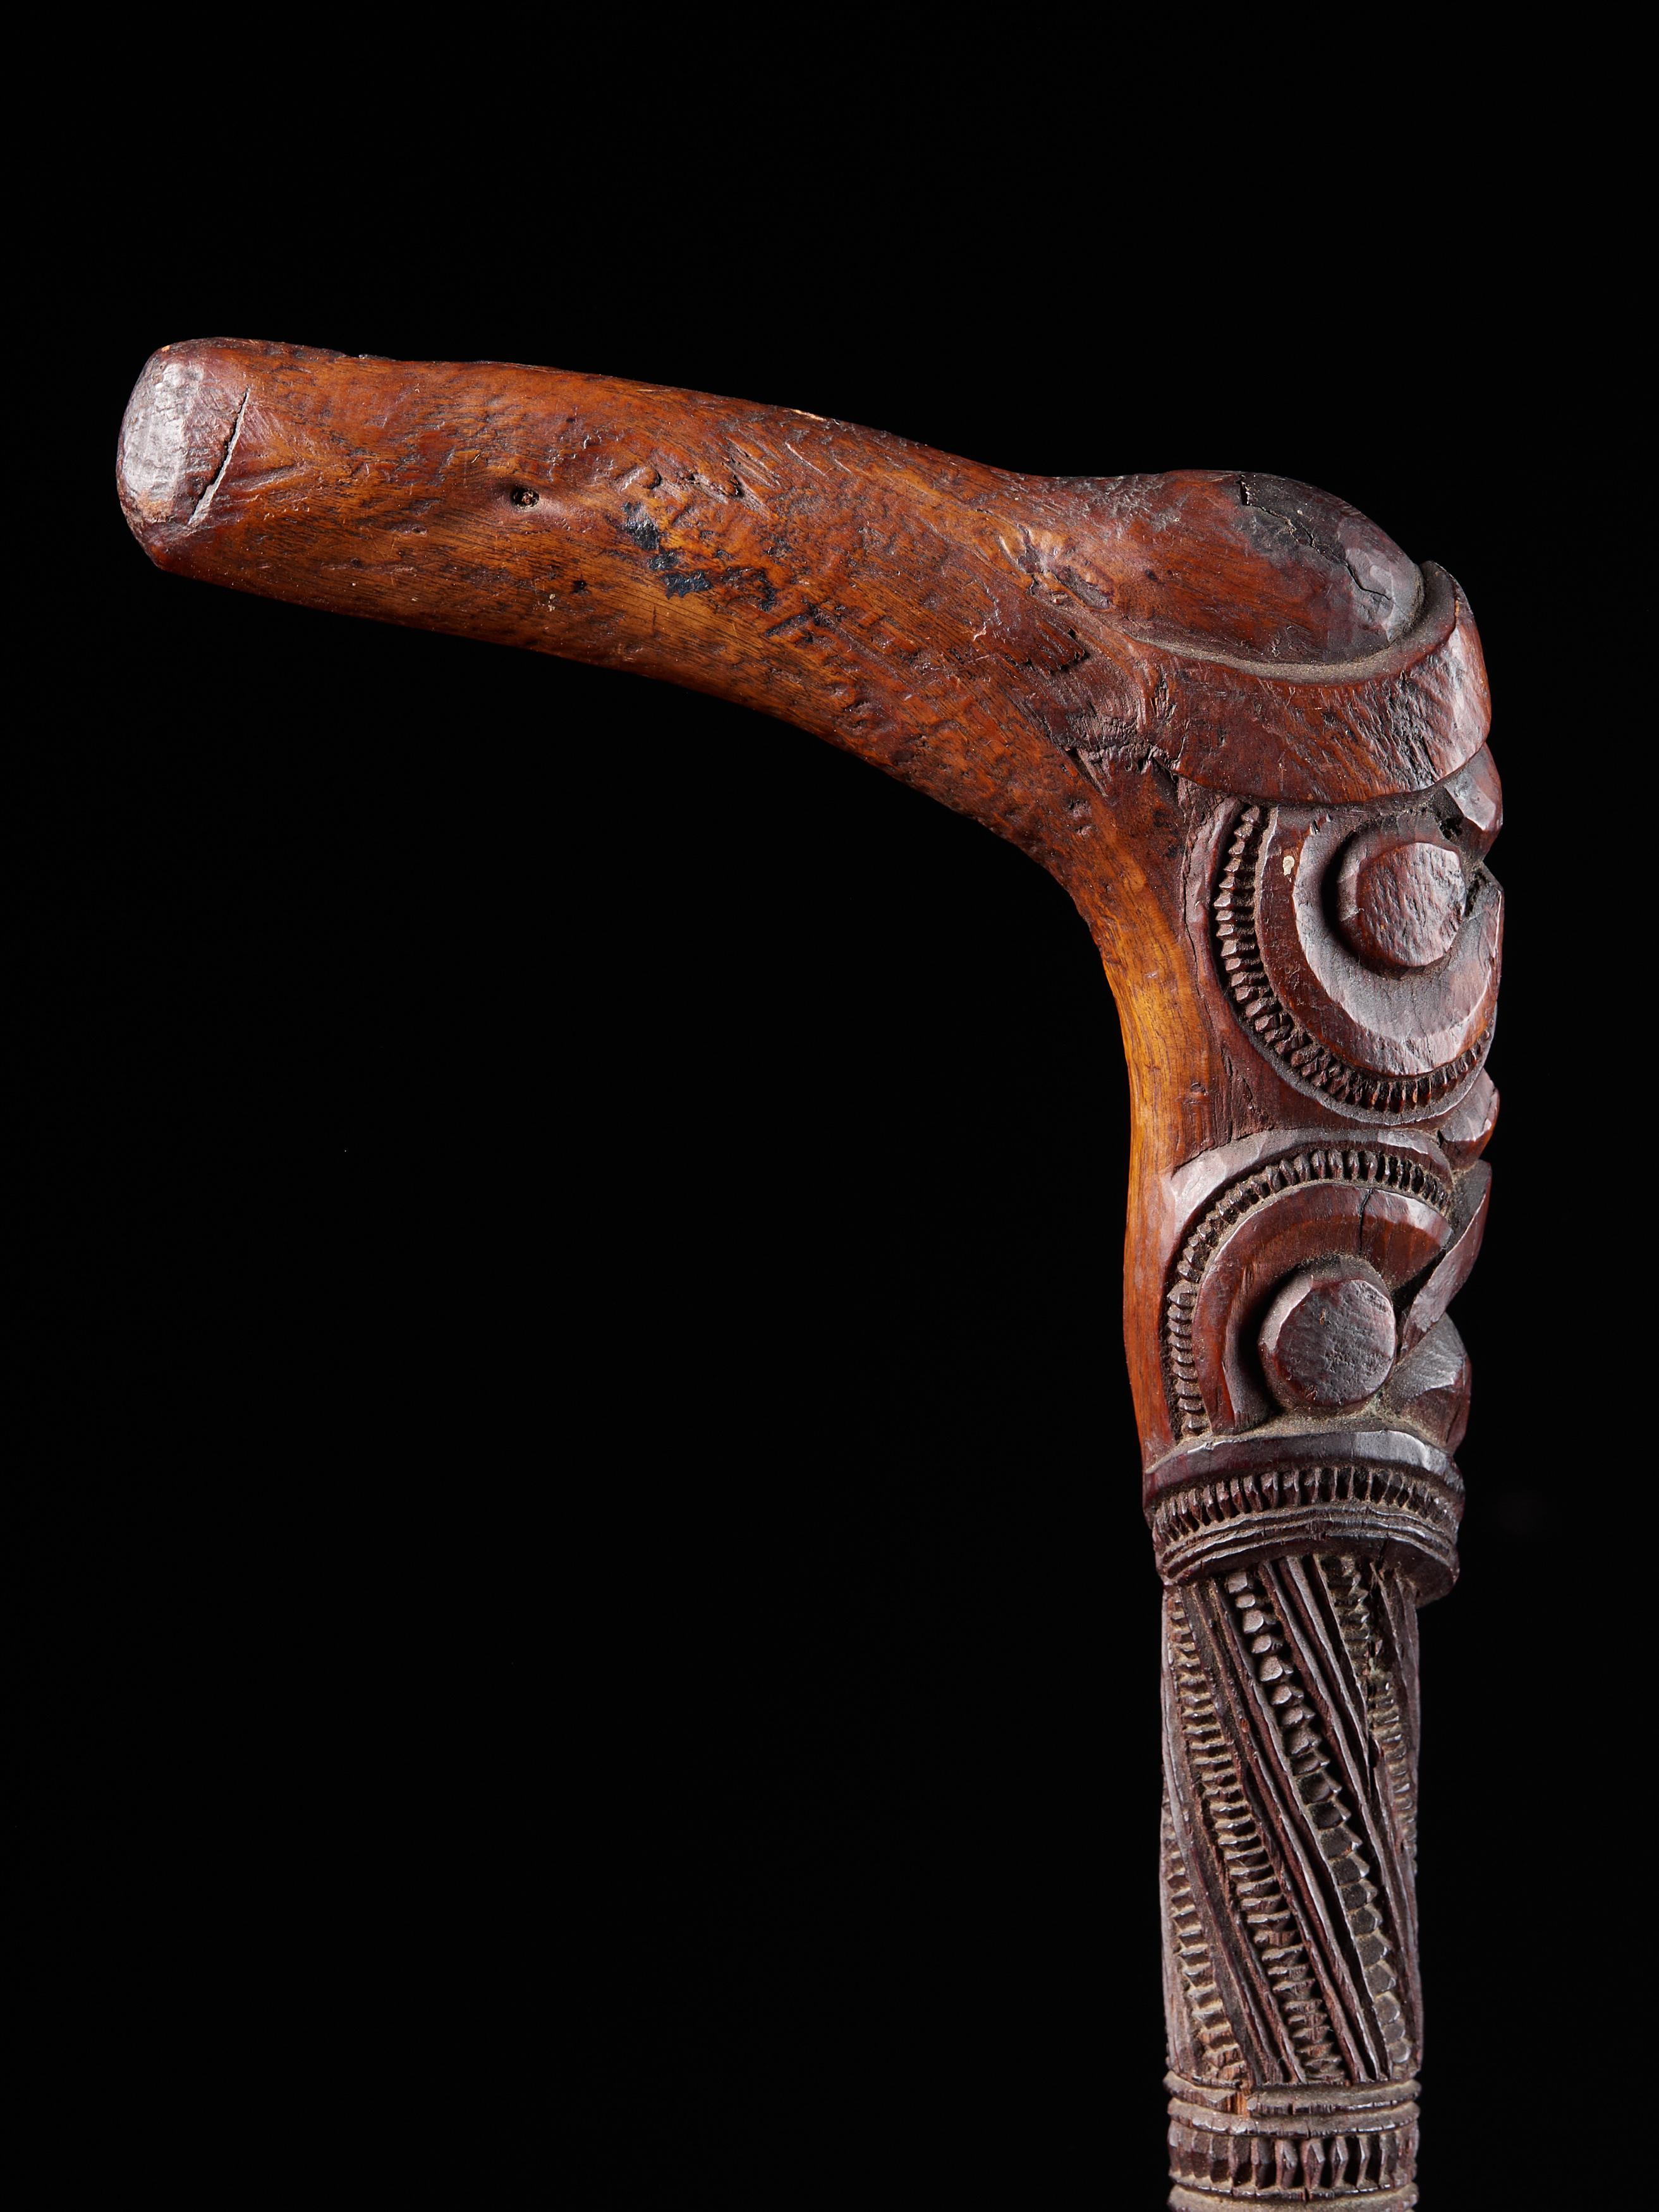 A completely carved, polished Maori wooden stick with crook in one piece. This walking stick or orator's staff is known as a tokotoko. Symbol of authority, this item was usually held during formal speeches.